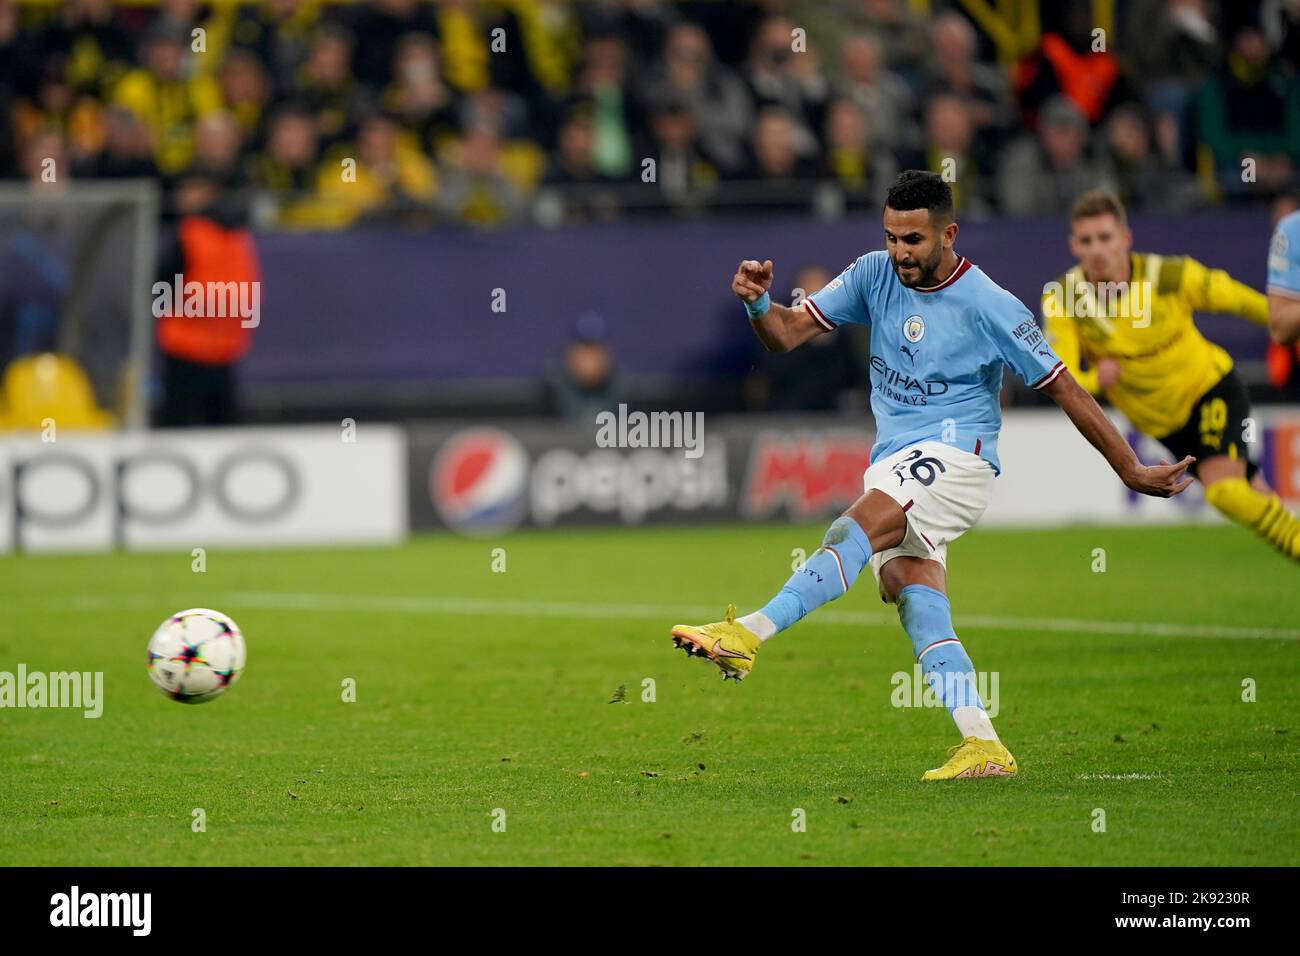 Manchester City’s Riyad Mahrez misses a penalty during the UEFA Champions League group G match at Signal Iduna Park in Dortmund, Germany. Picture date: Tuesday October 25, 2022. Stock Photo